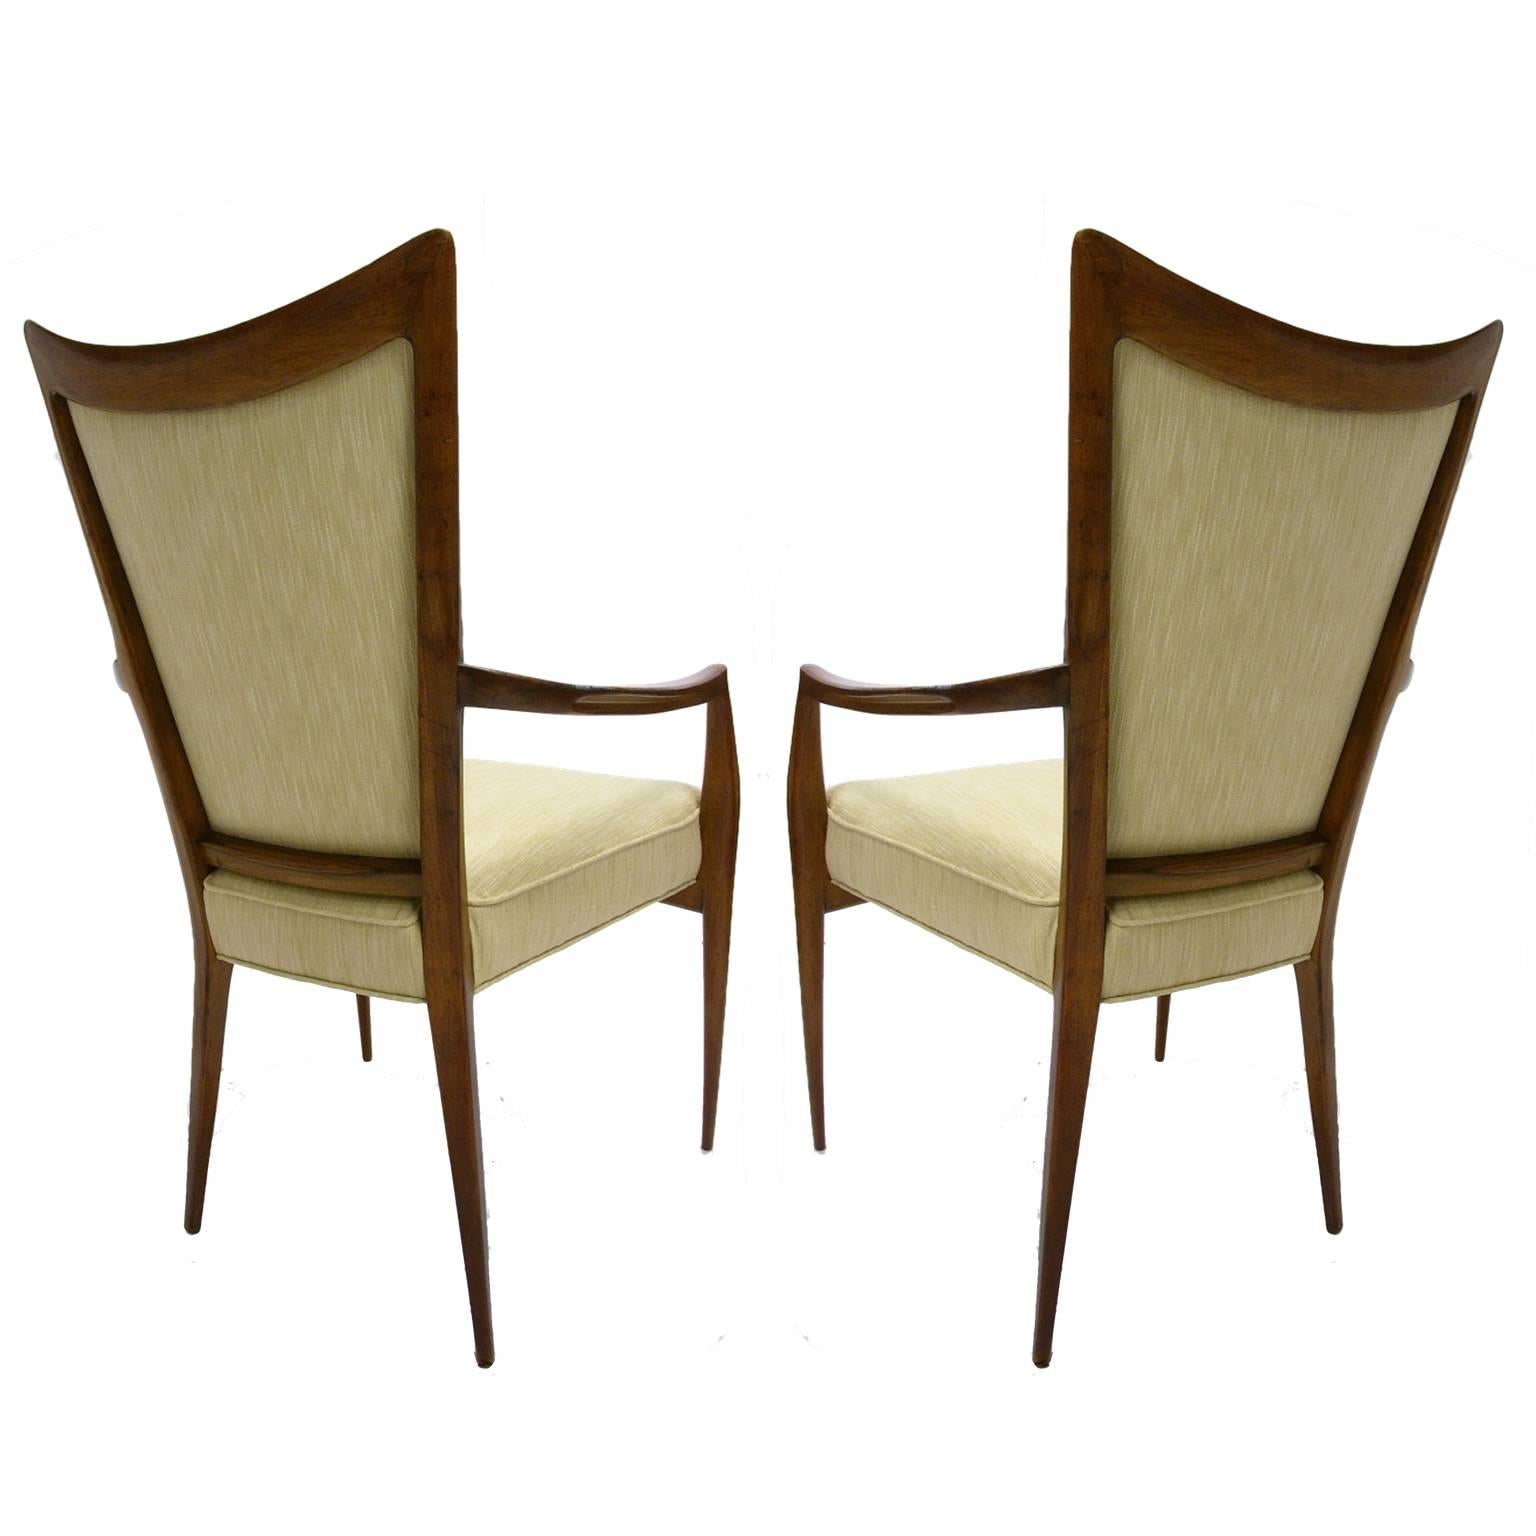 Italian Stunning Pair of Sculptural Mahogany and Silk Chairs by Melchiorre Bega